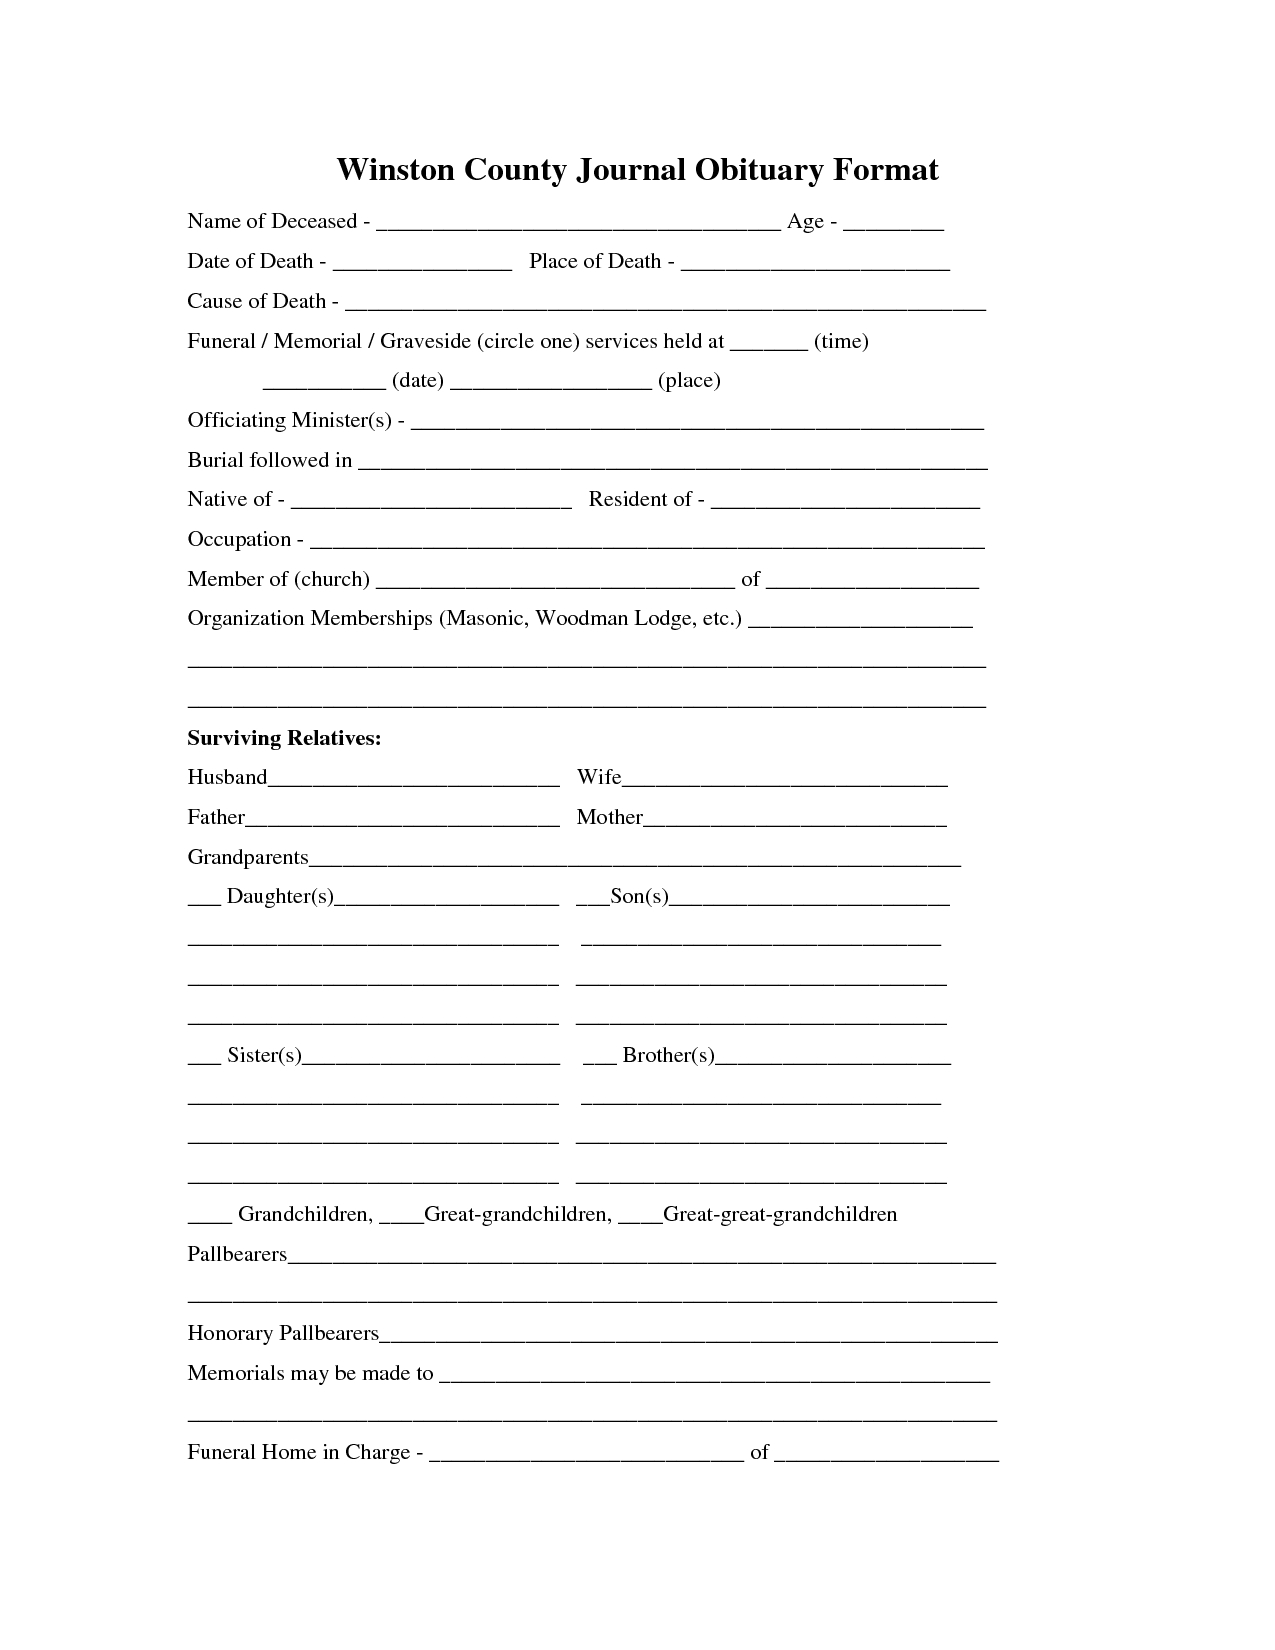 Printable Obituary Template | Fill In The Blank Obituary Pertaining To Fill In The Blank Obituary Template